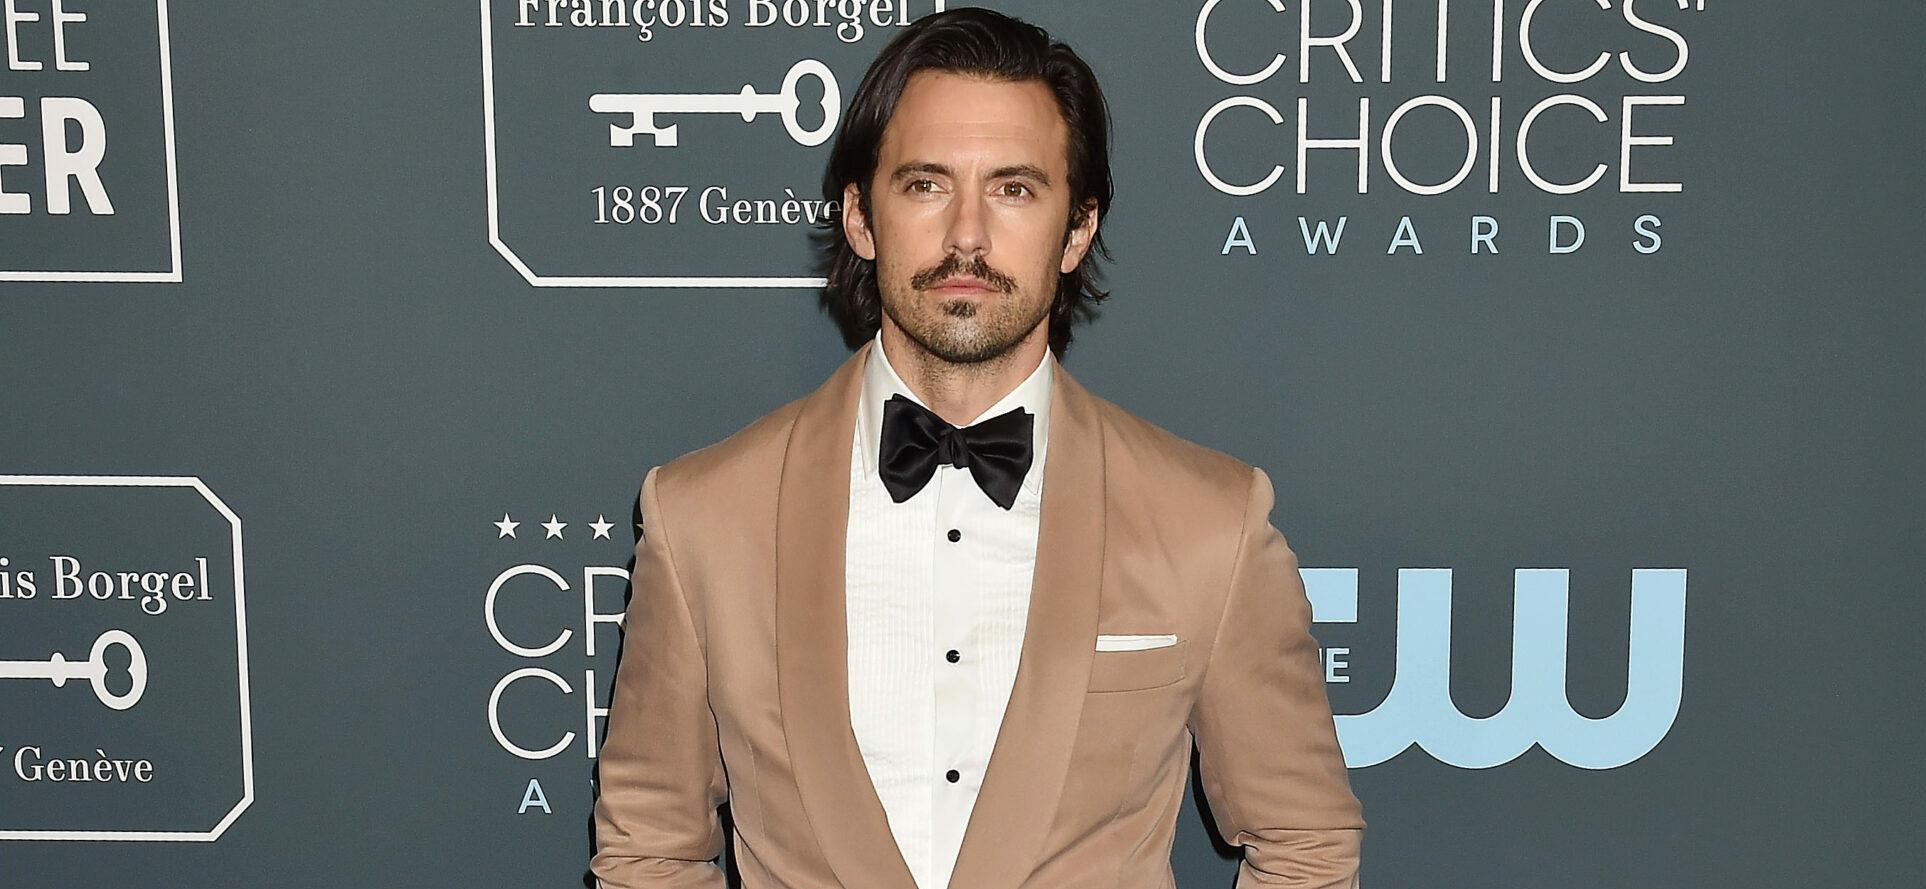 'This Is Us' Star Mandy Moore Congratulates Co-Star Milo Ventimiglia On Hollywood Star